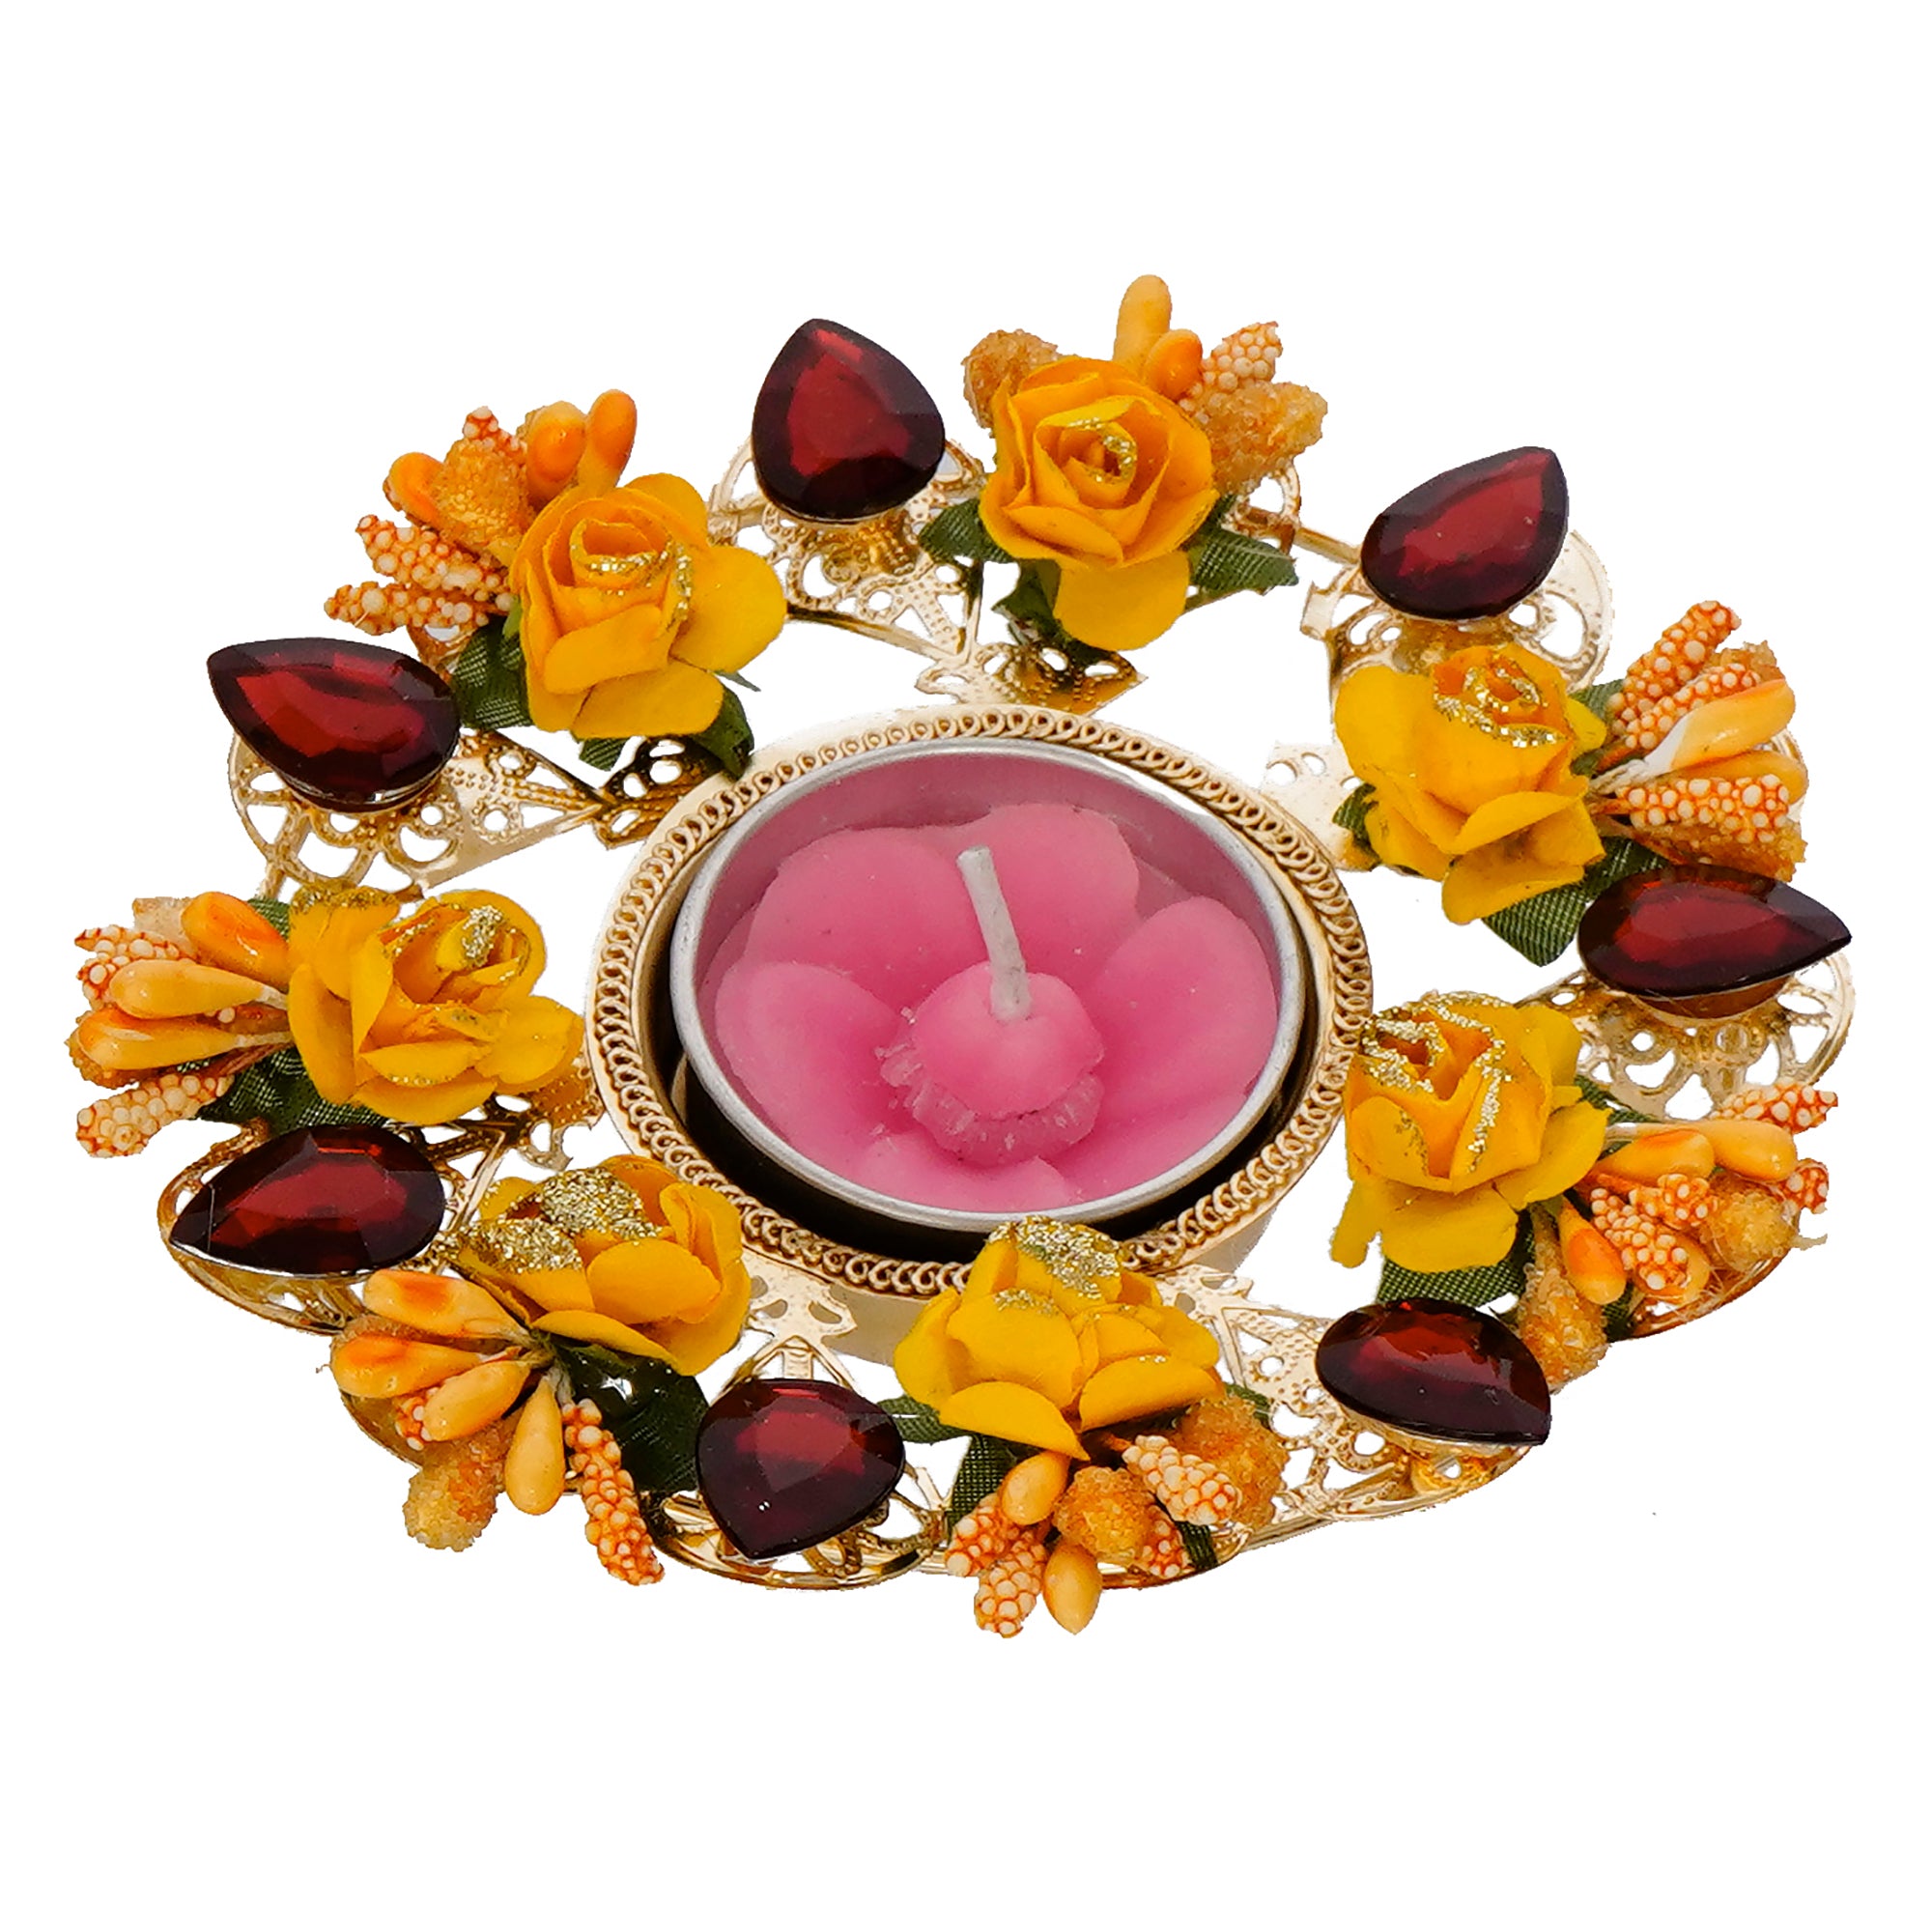 Decorative Handcrafted Yellow and Red Floral Tea Light Holder 2